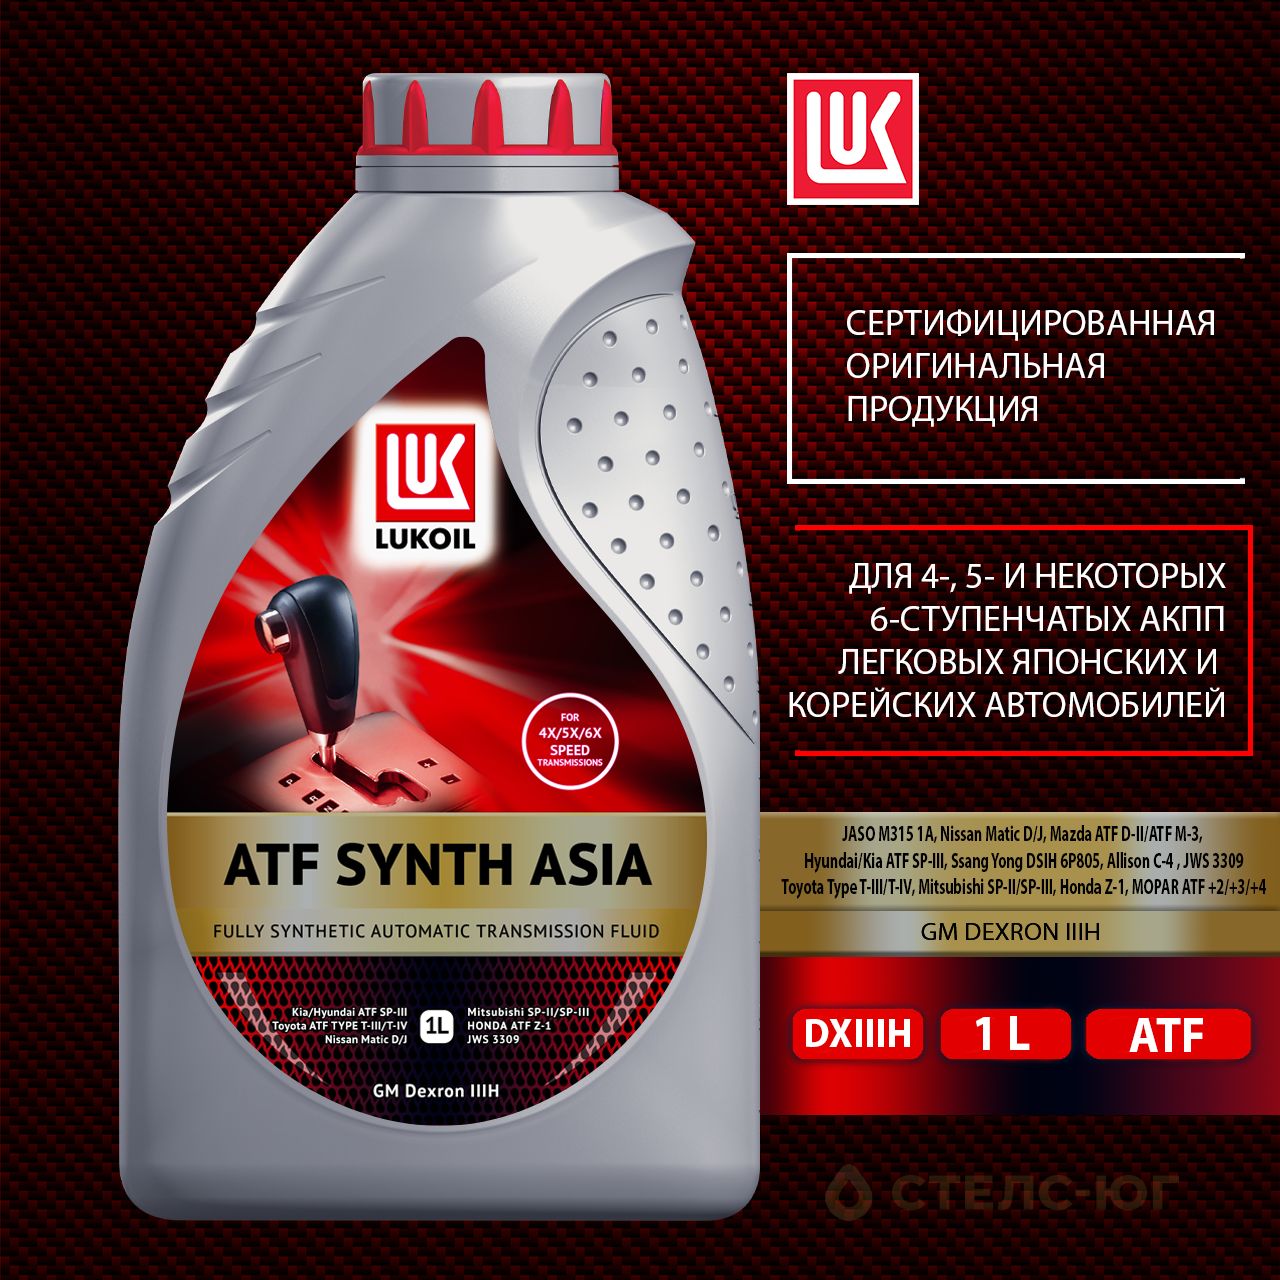 Atf synth multi. Lukoil ATF Synth Asia. Масло трансмиссионное Лукойл ATF Synth Asia 1л.. Лукойл ATF Synth Asia 4. Лукойл 3132619 жидкость трансмиссионная.